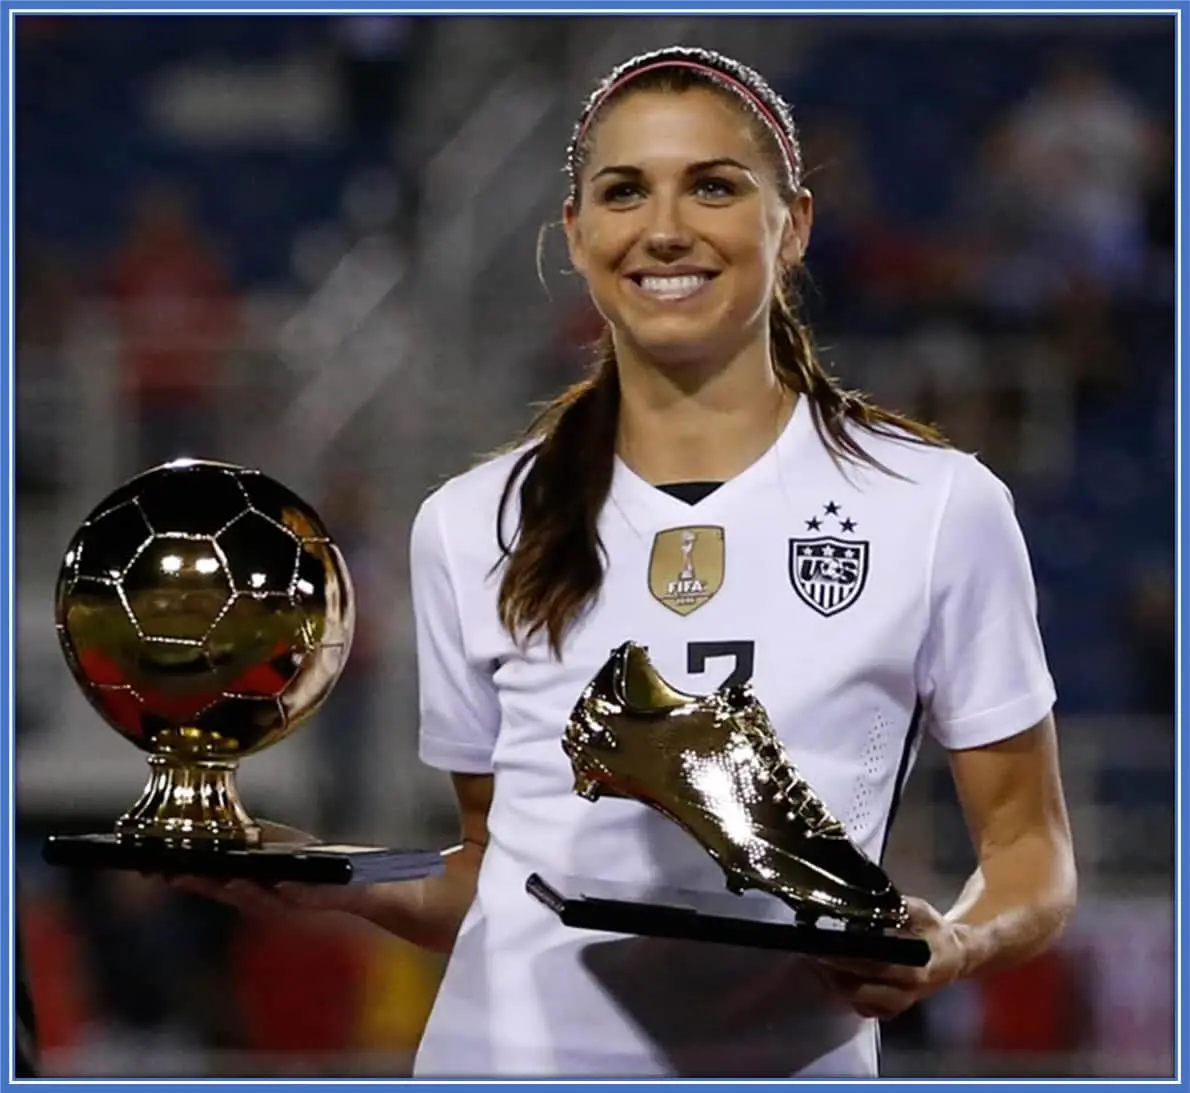 The USWNT won the silver boot and celebrated her victory in the 2019 World Cup.